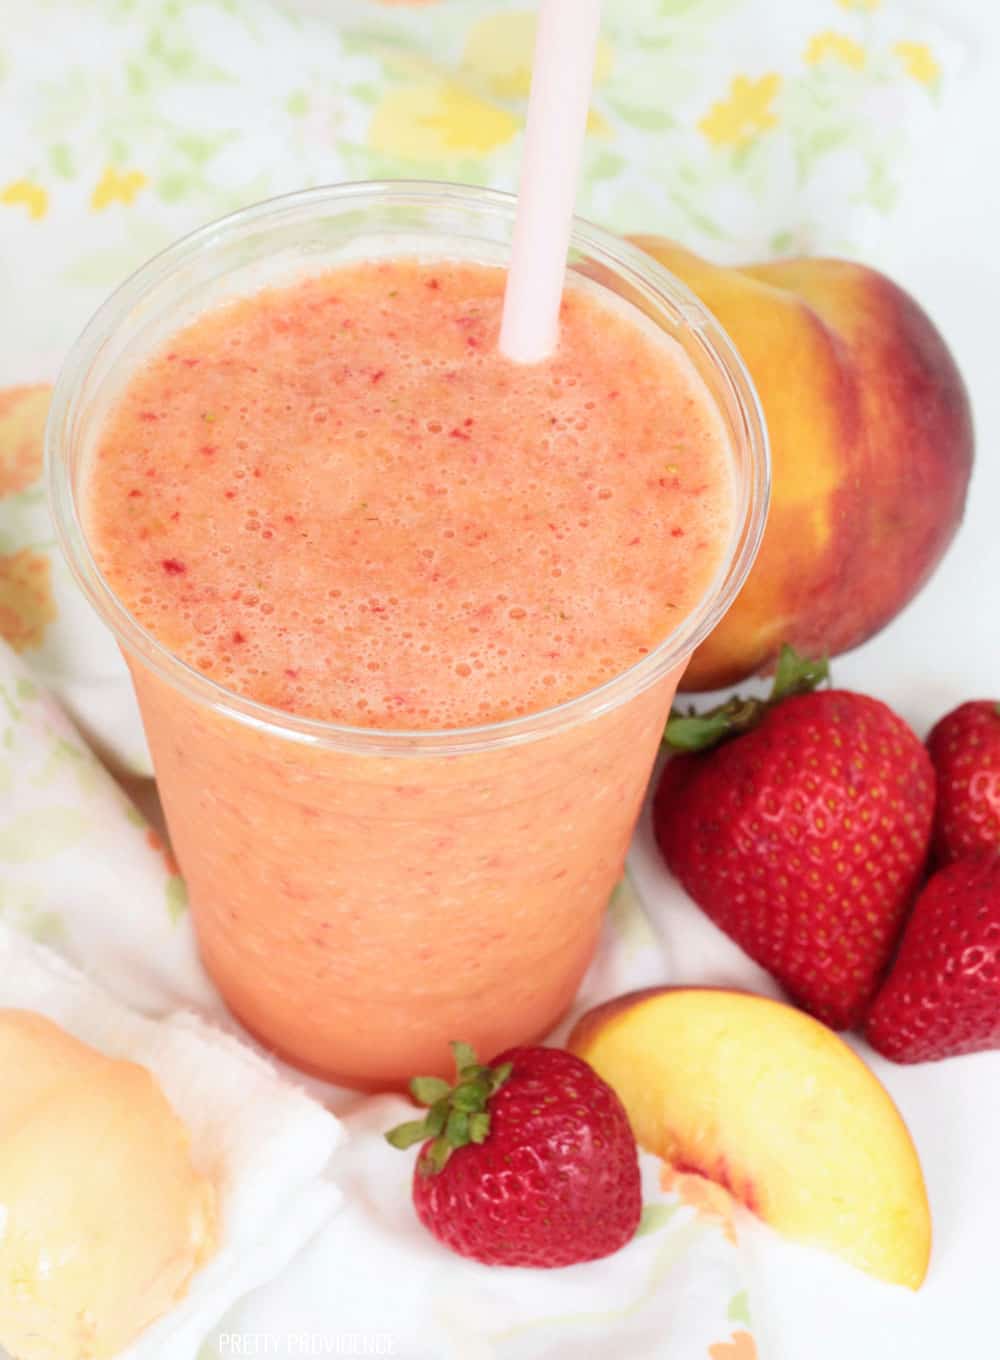 Caribbean Passion smoothie with peach slices, strawberries and a pink straw as garnish.